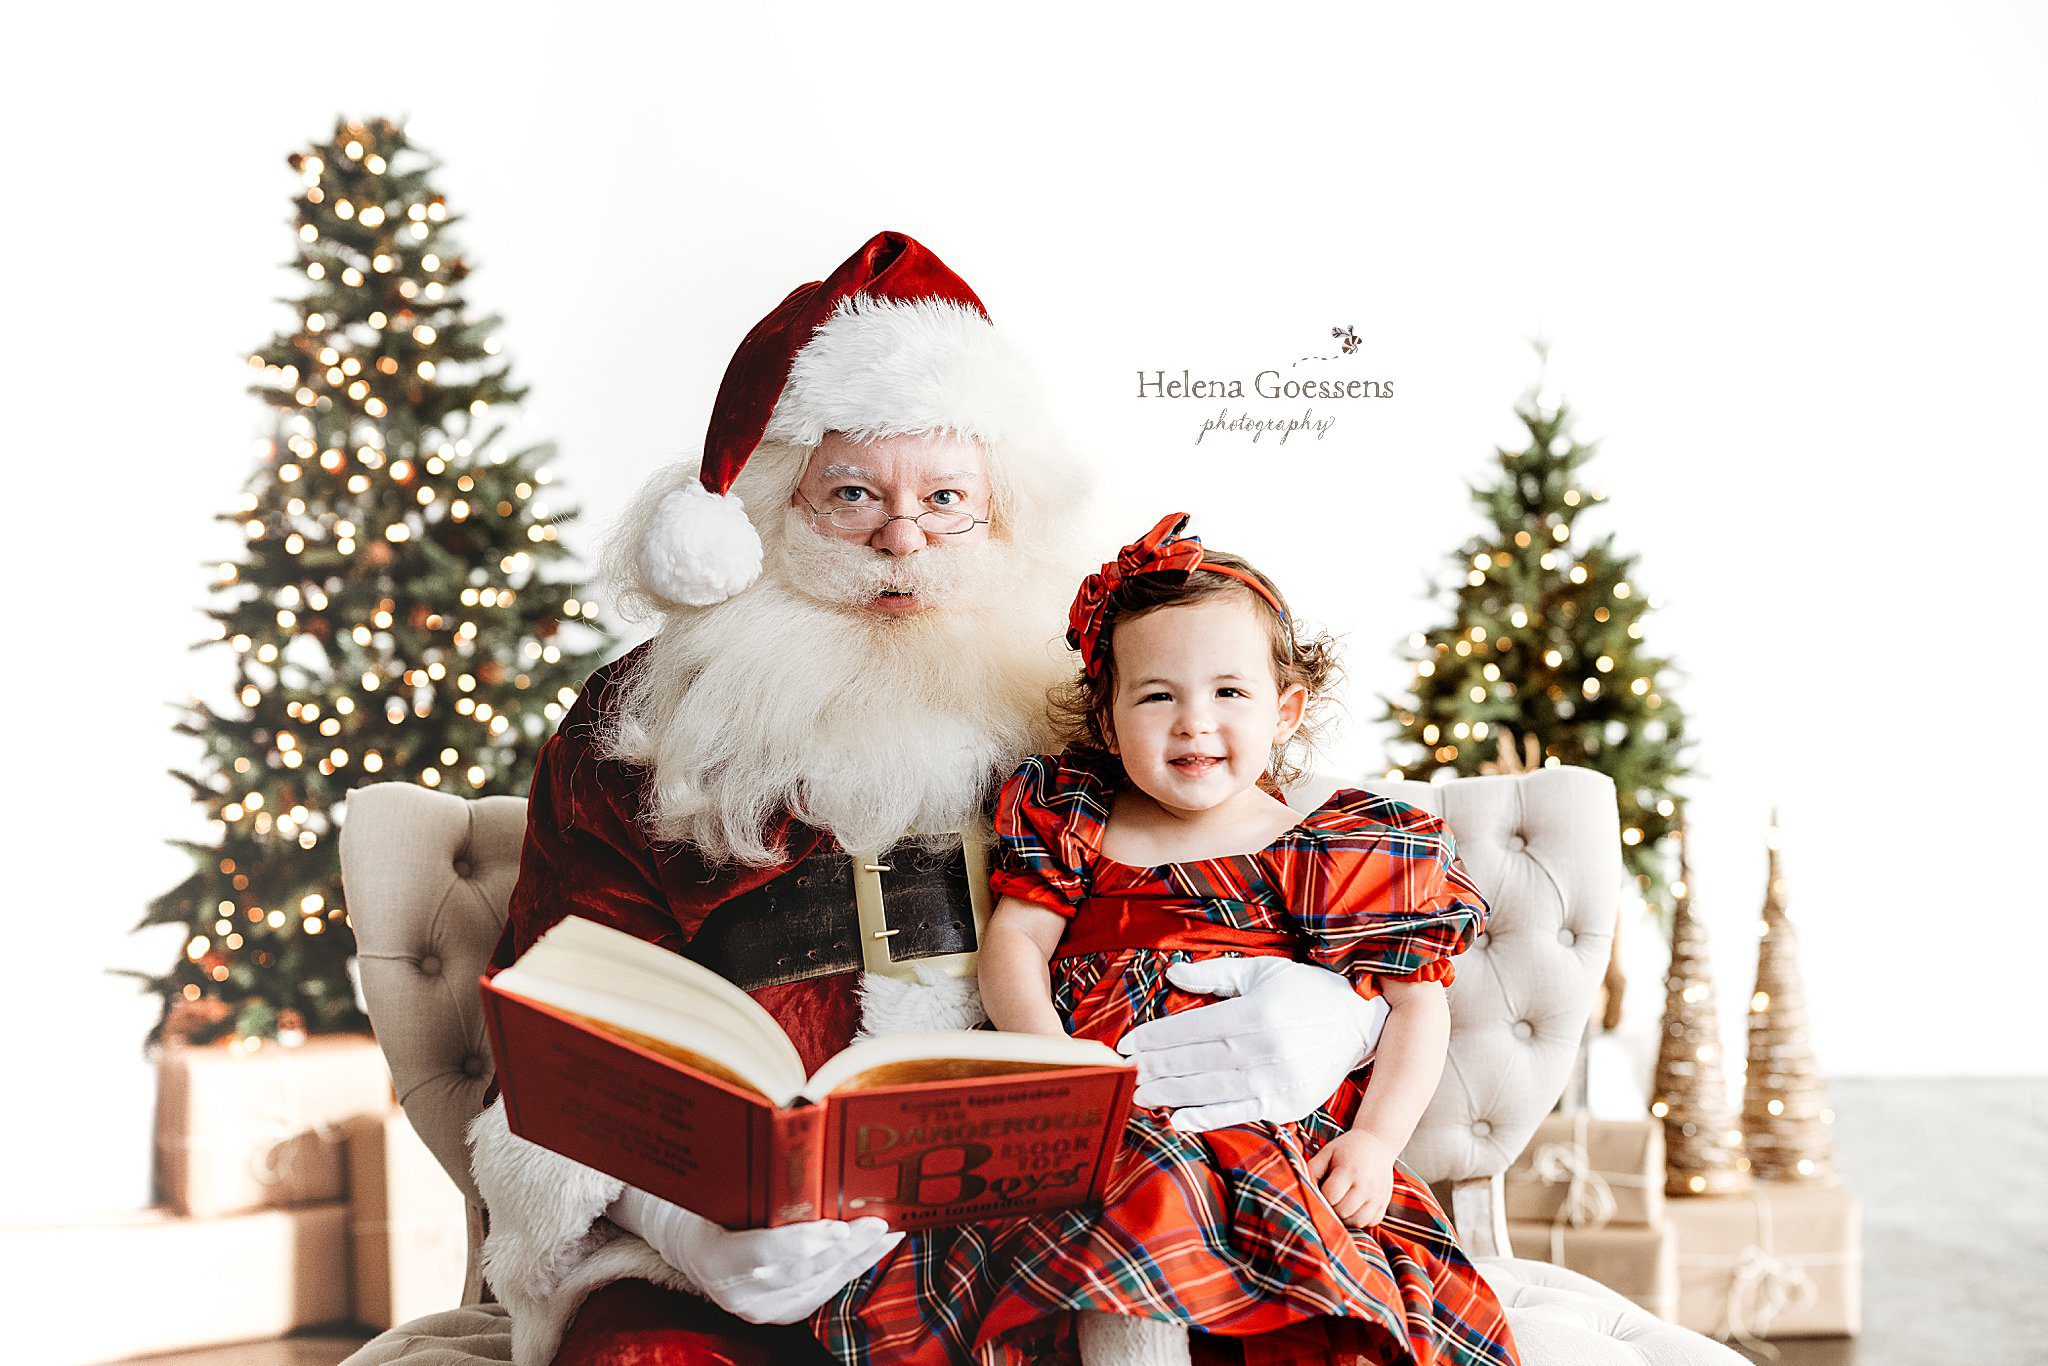 Santa reads to girl in red and green plaid dress for Studio Santa Portraits in Norwood, MA